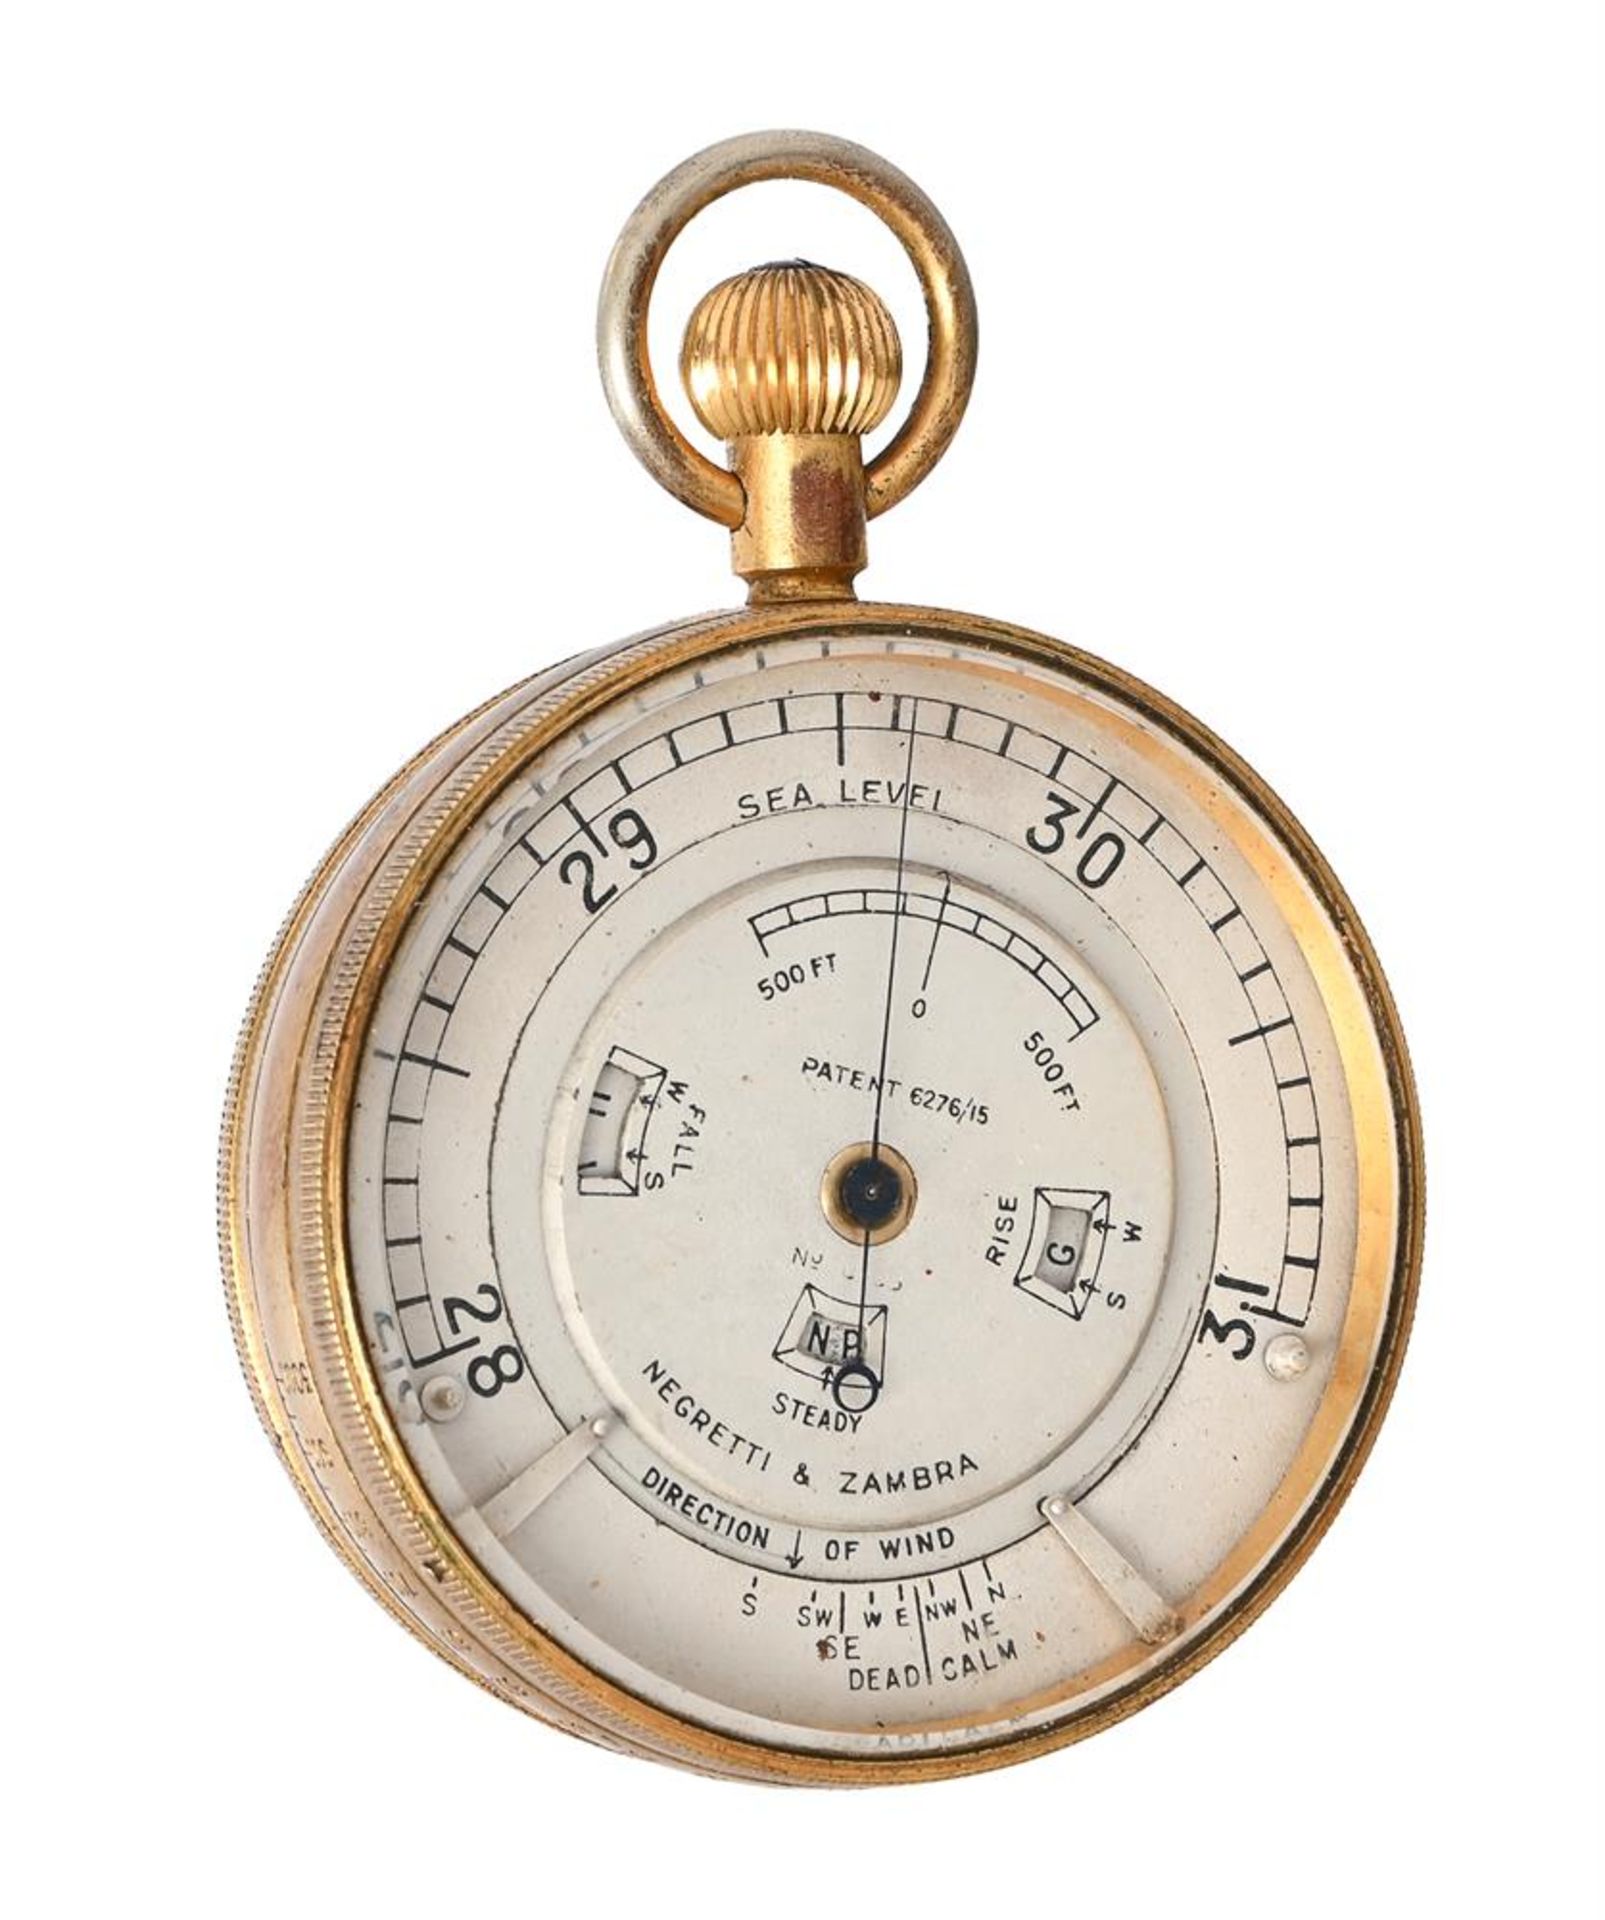 A GILT BRASS ANEROID POCKET WEATHER FORETELLER BOROMETER OR ‘WEATHER WATCH’ - Image 2 of 5